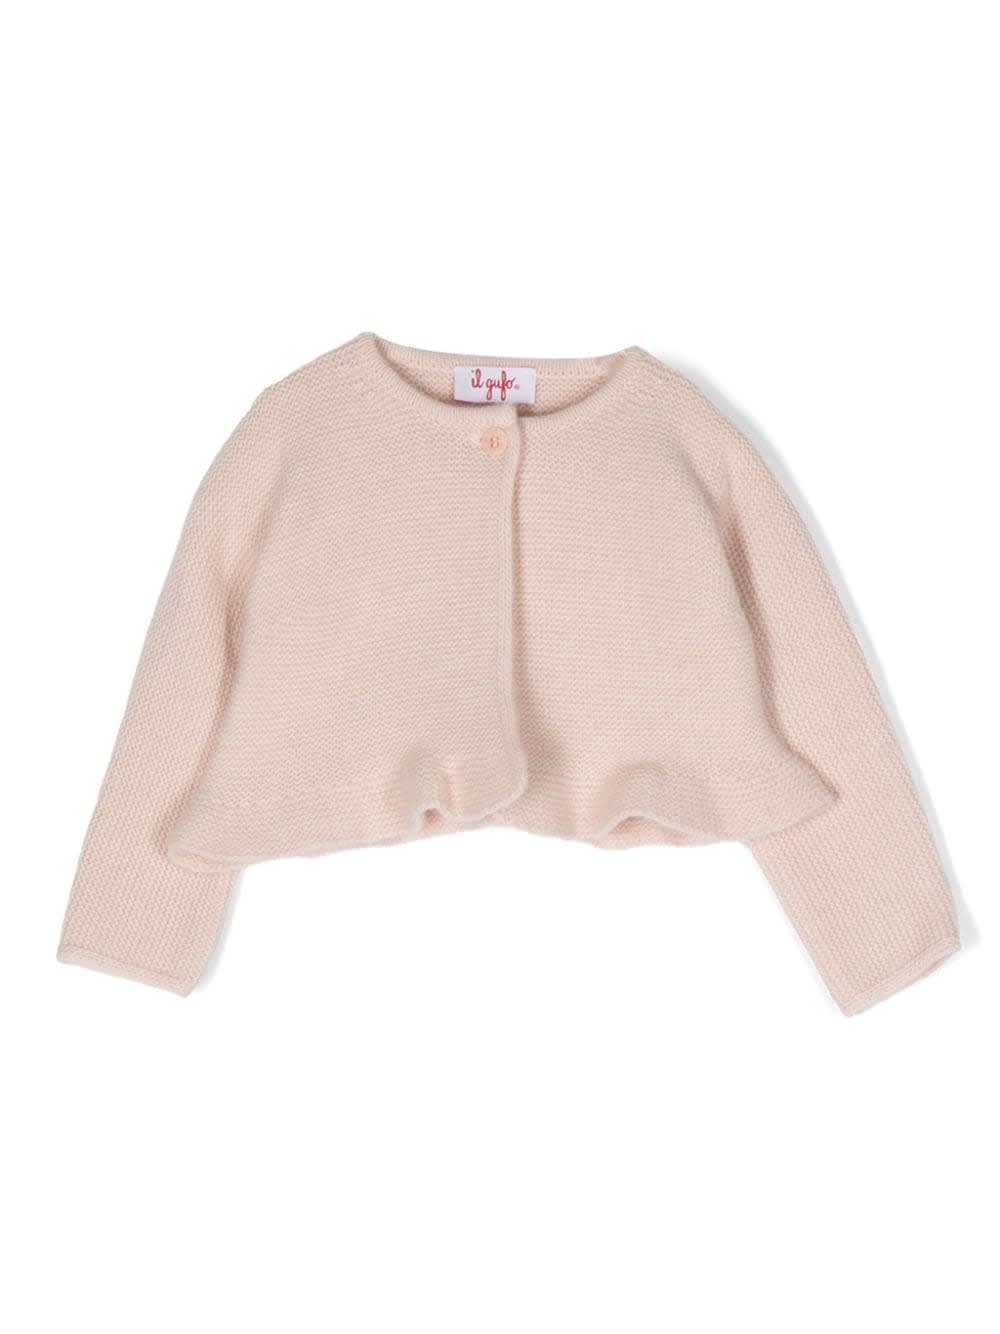 IL GUFO PINK TRICOT CARDIGAN WITH RUFFLE